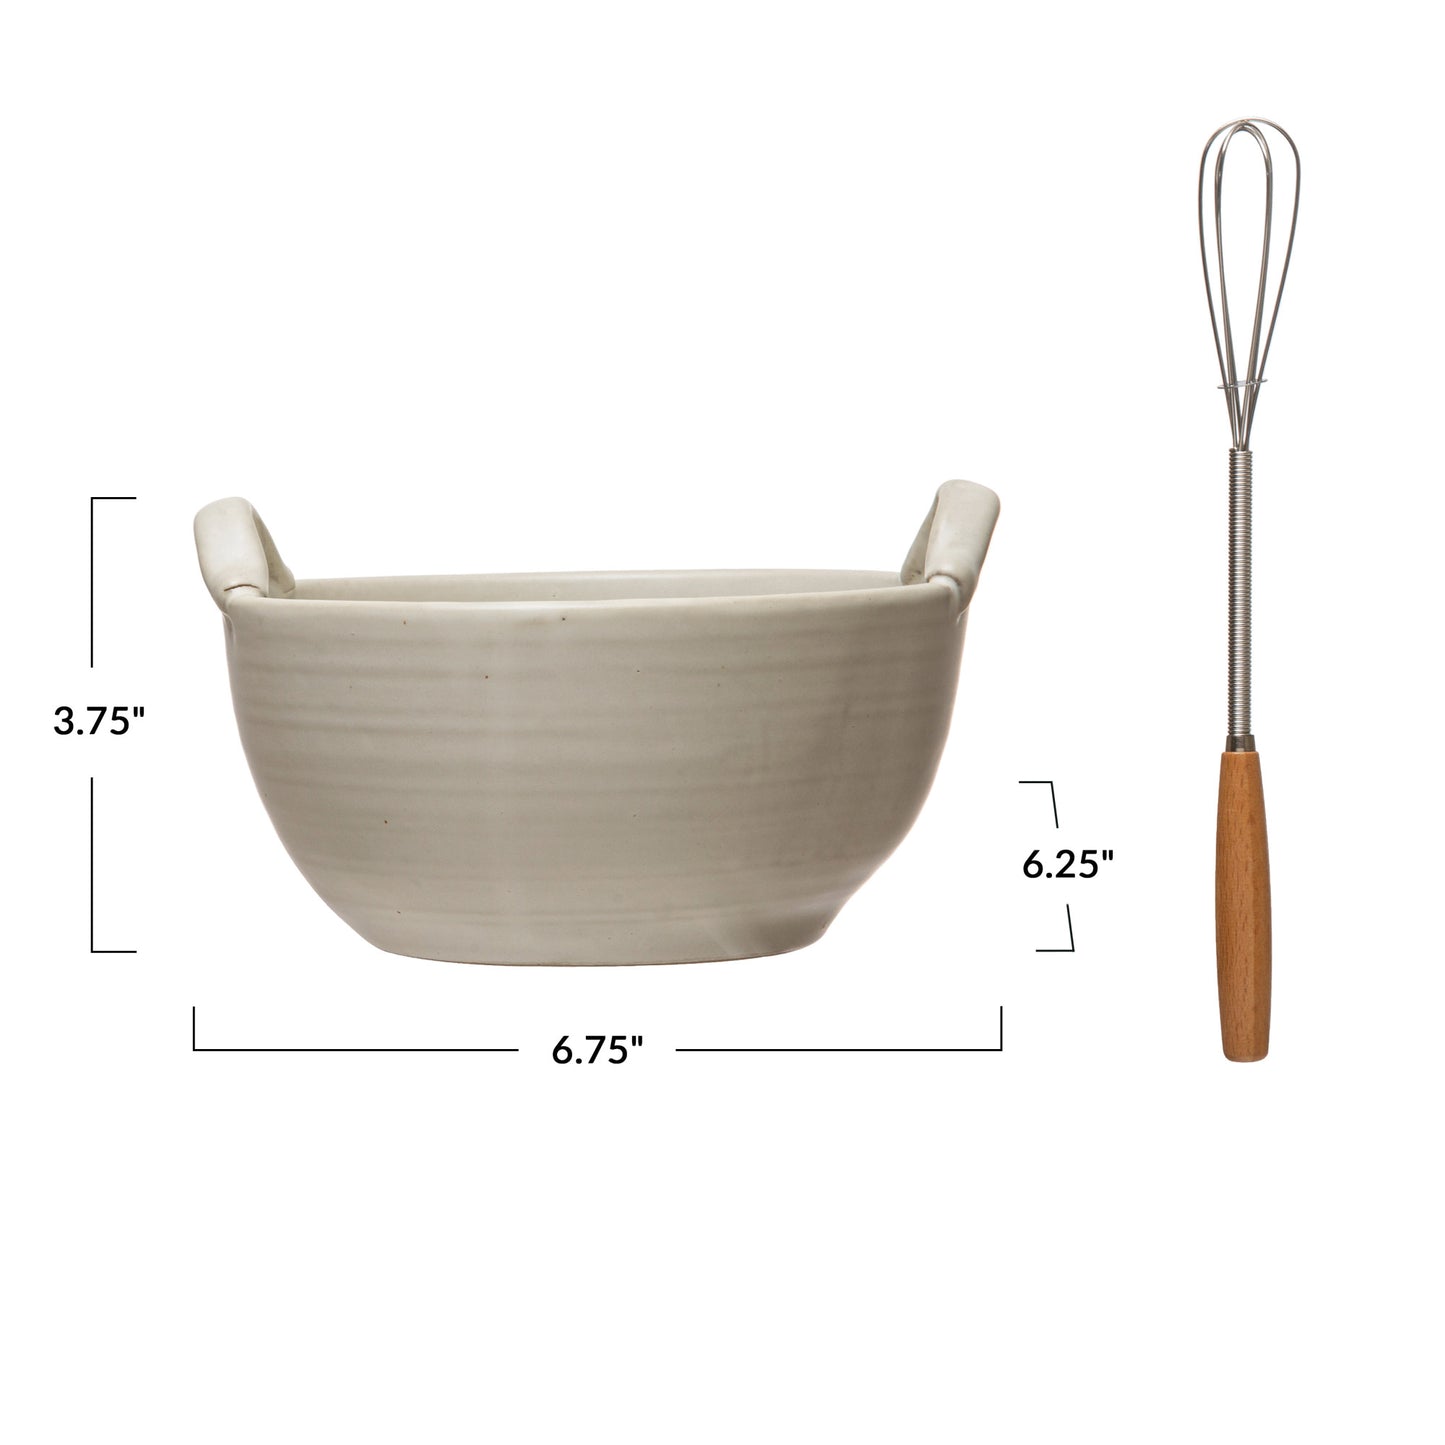 Stoneware Bowl, Wood and Metal Whisk, Set of 2